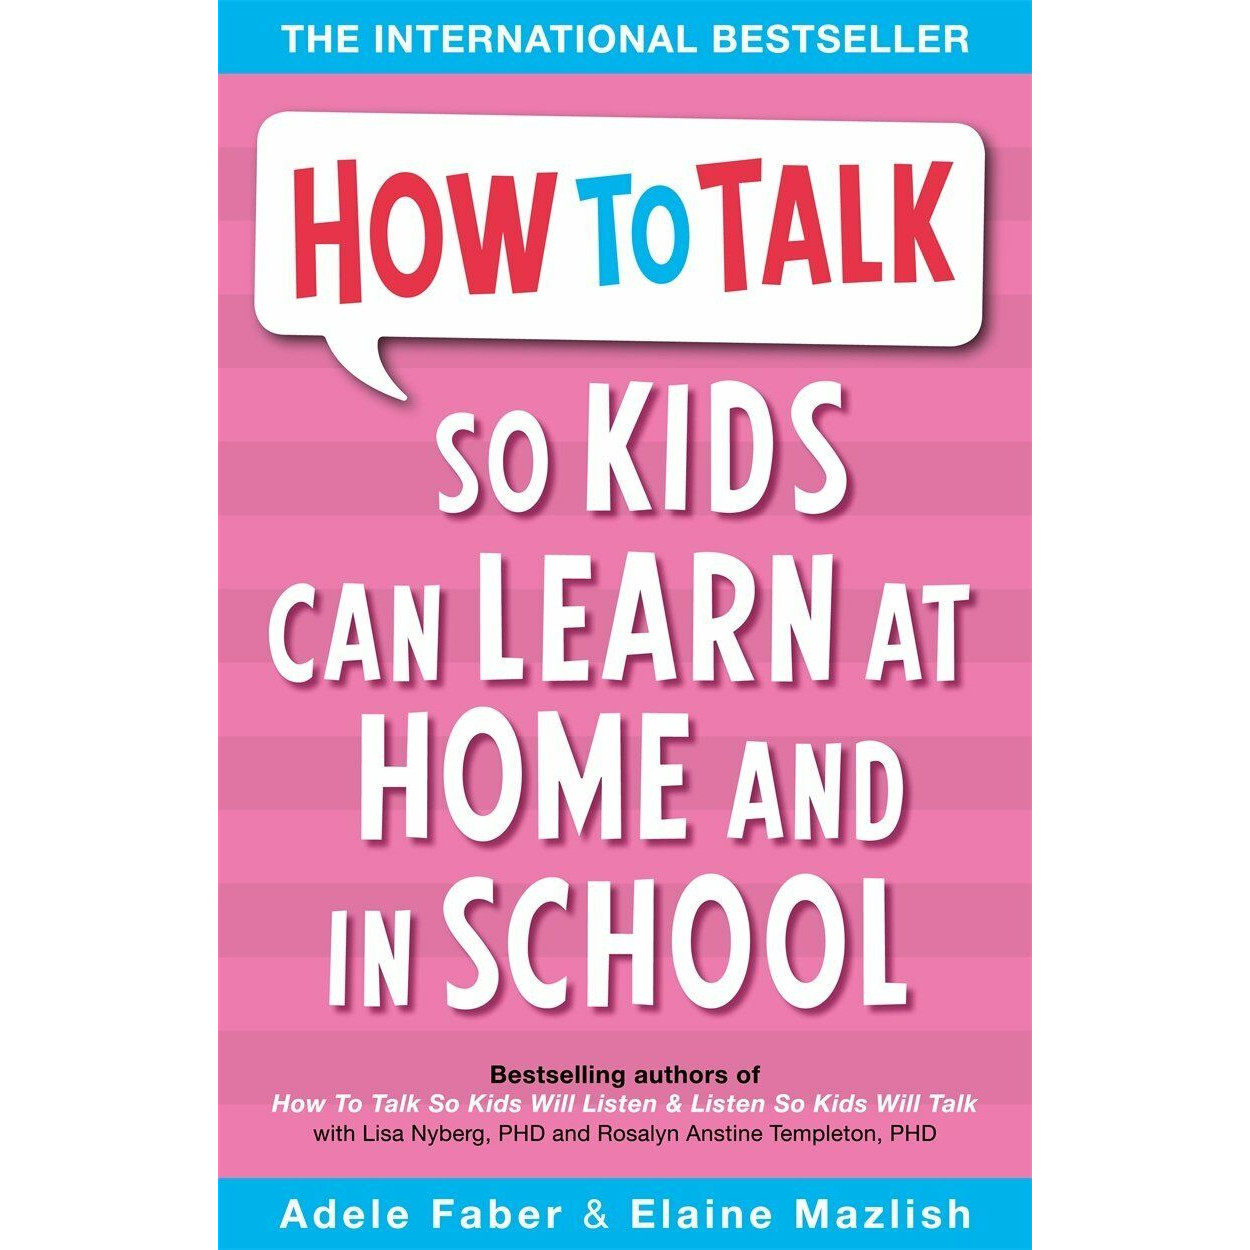 Sách tiếng Anh - How To Talk So Kids Can Learn At Home And In School